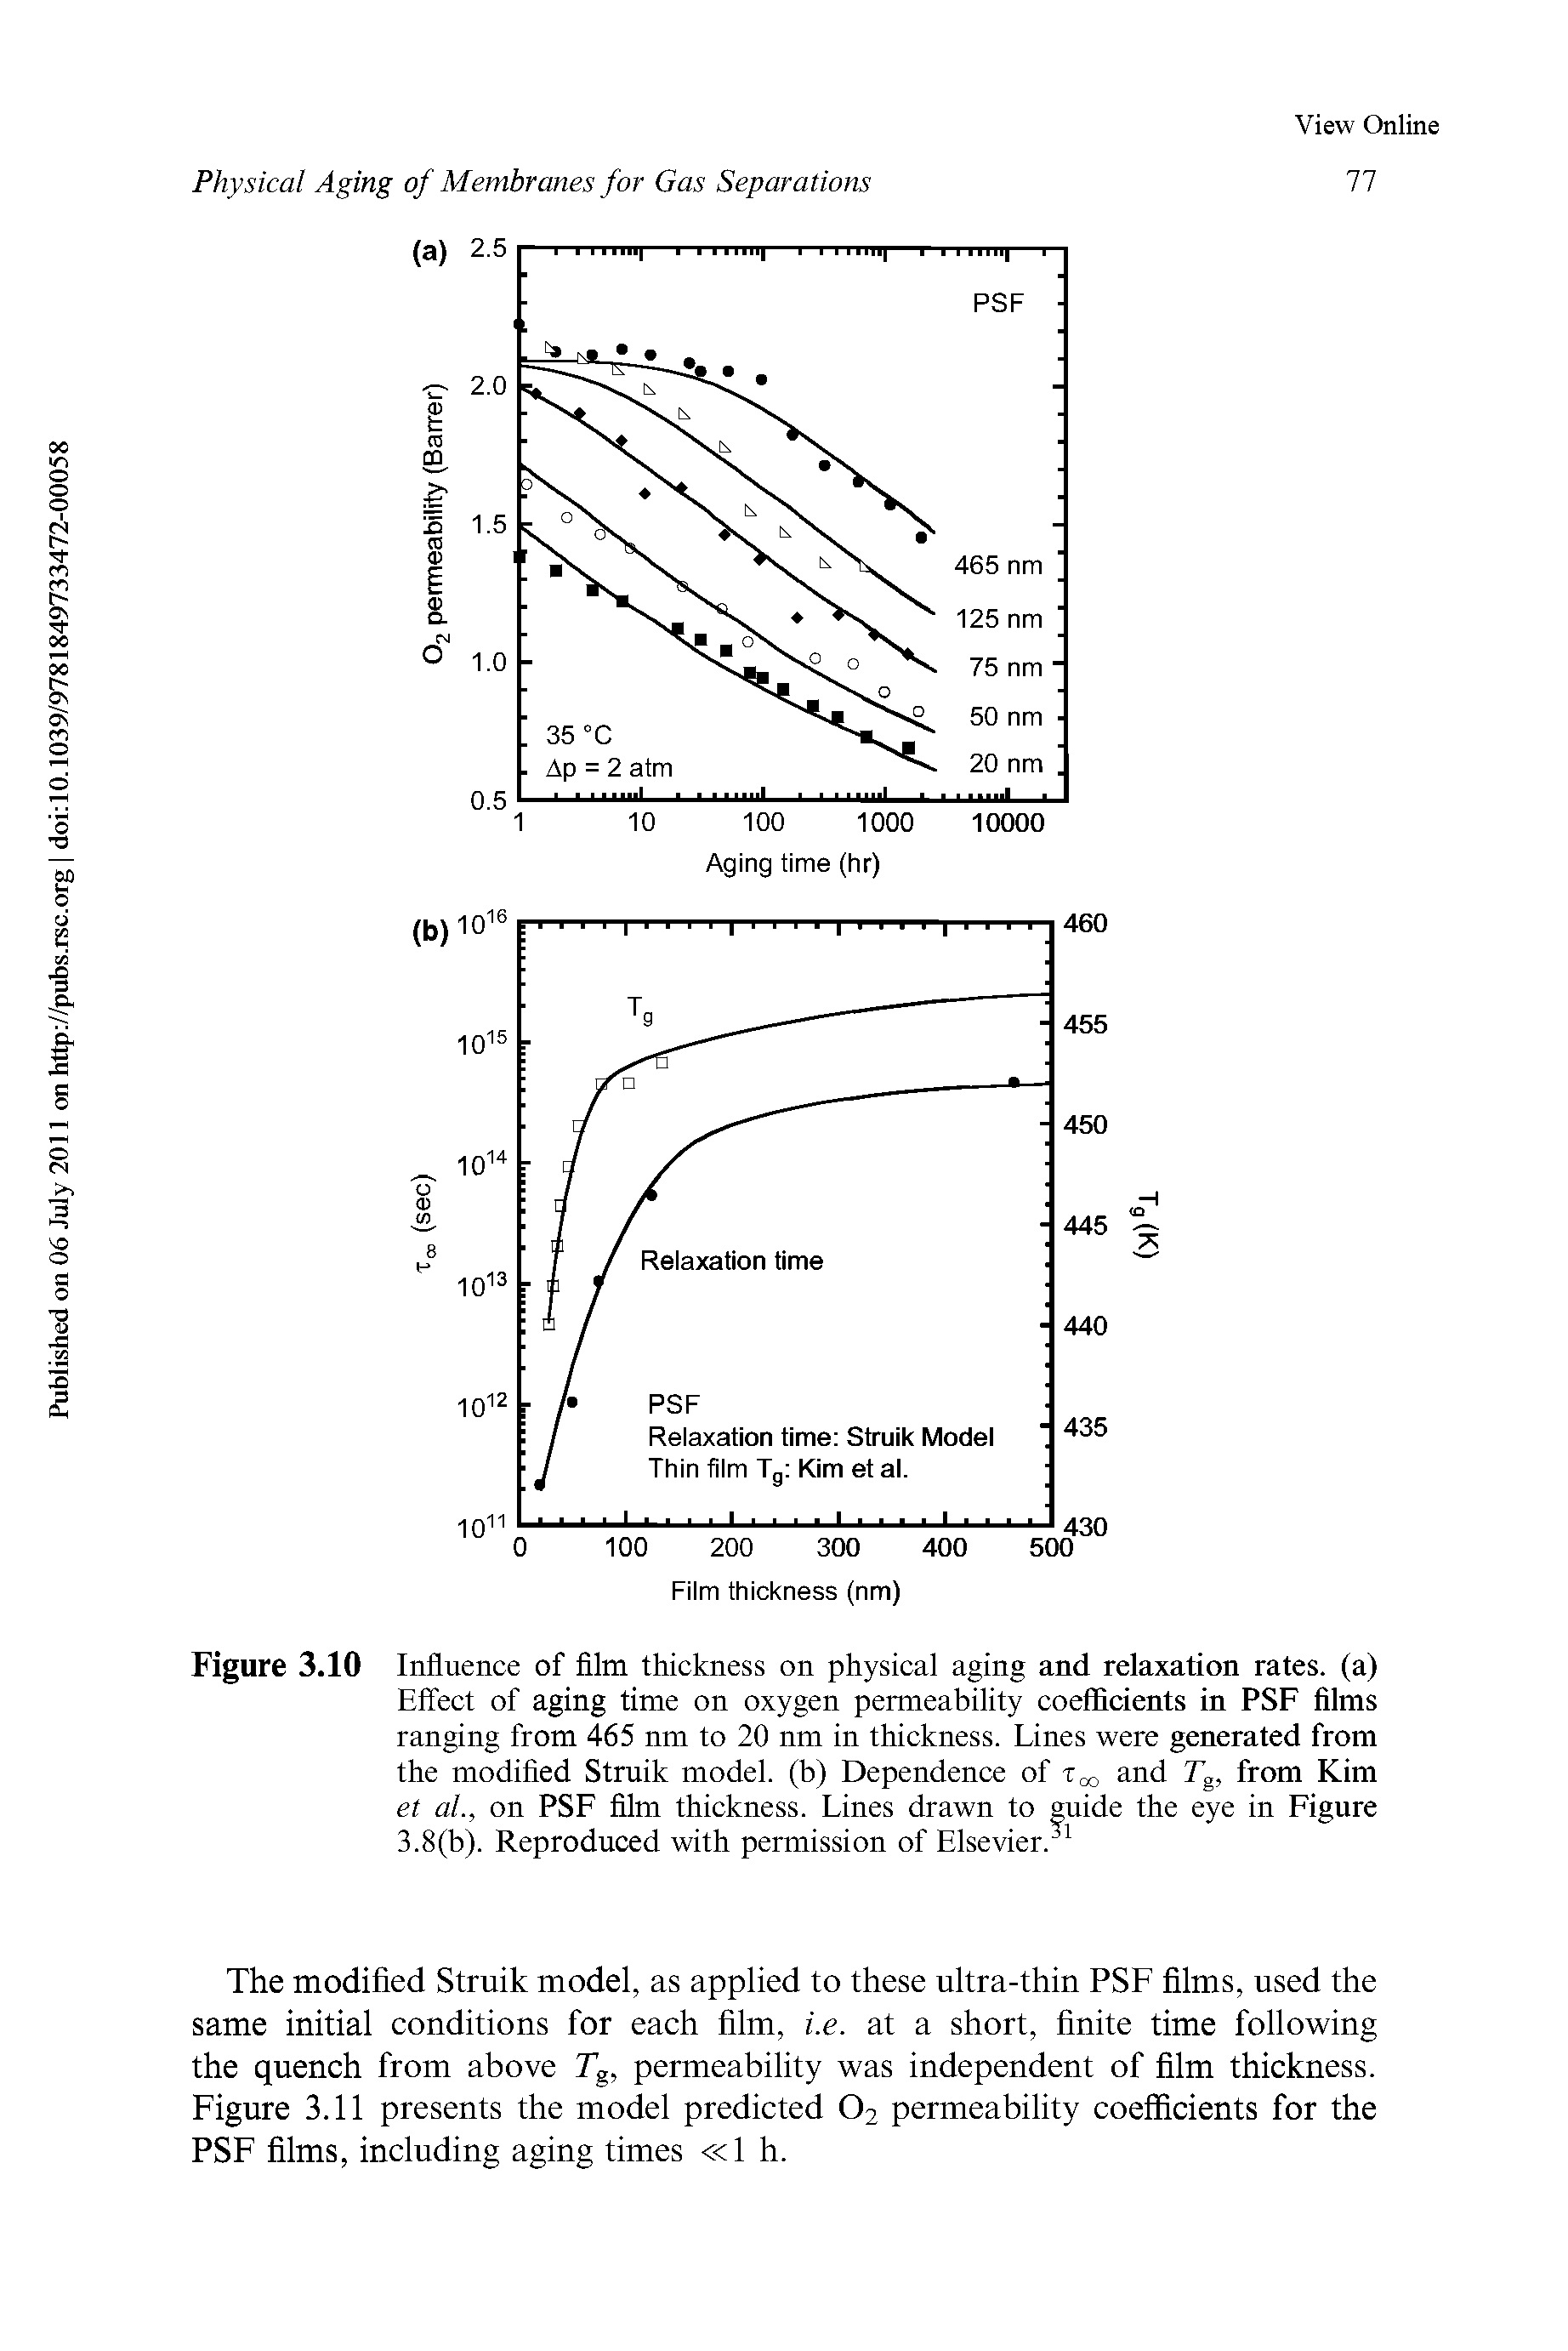 Figure 3.10 Influence of film thickness on physical aging and relaxation rates, (a) Effect of aging time on oxygen permeability coefficients in PSF films ranging from 465 nm to 20 nm in thickness. Lines were generated from the modified Struik model, (b) Dependence of and Tg, from Kim et al., on PSF film thickness. Lines drawn to guide the eye in Figure 3.8(b). Reproduced with permission of Elsevier. ...